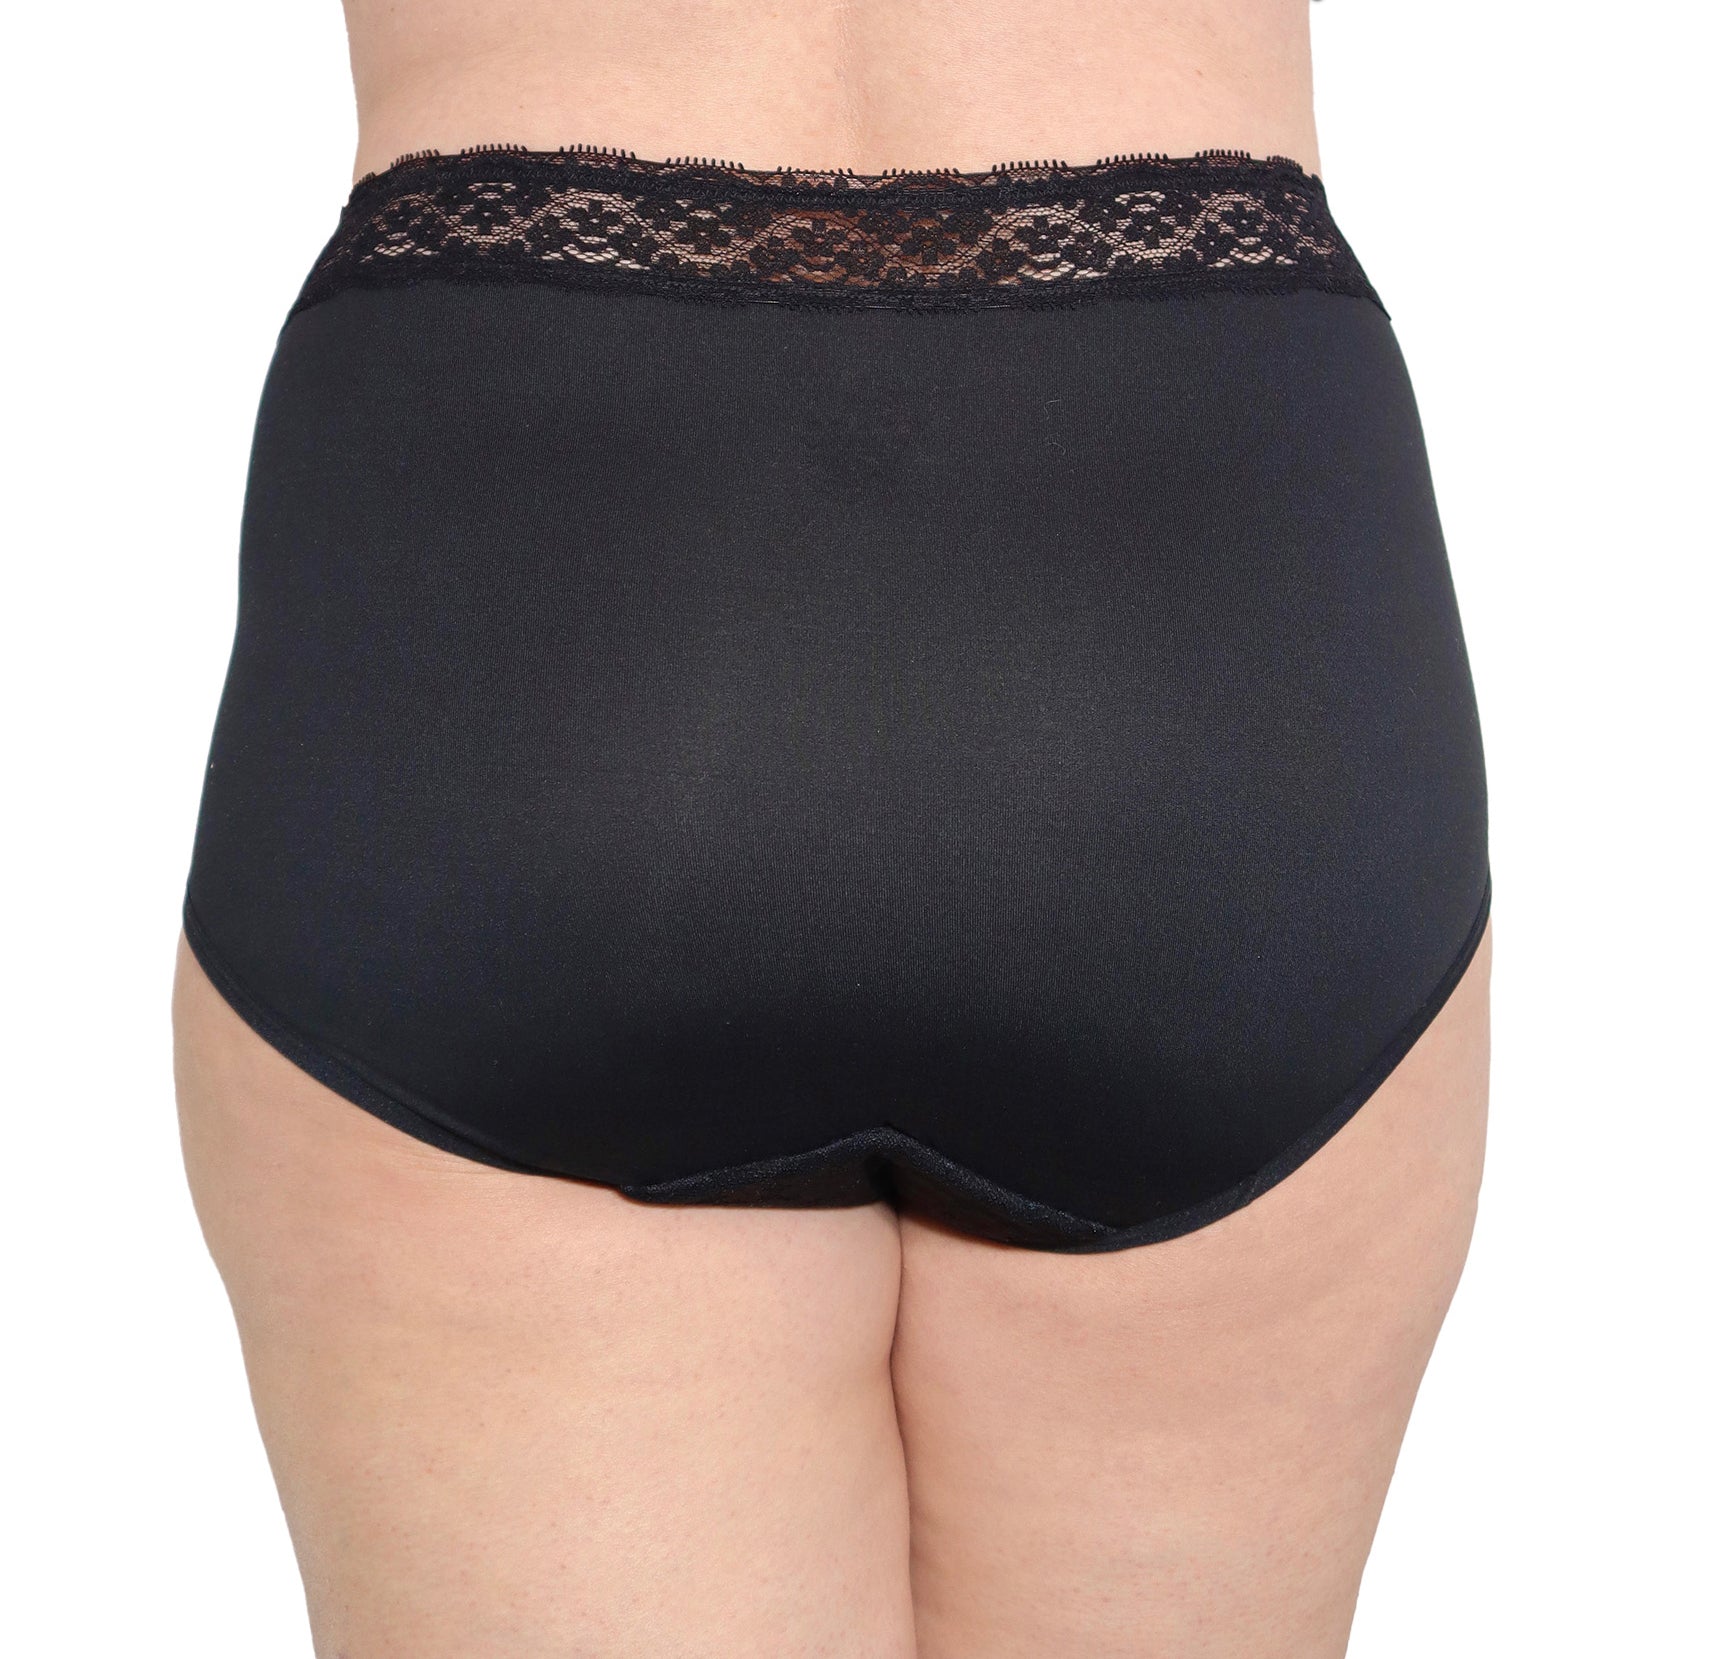 Full Brief Lace Panty - Black